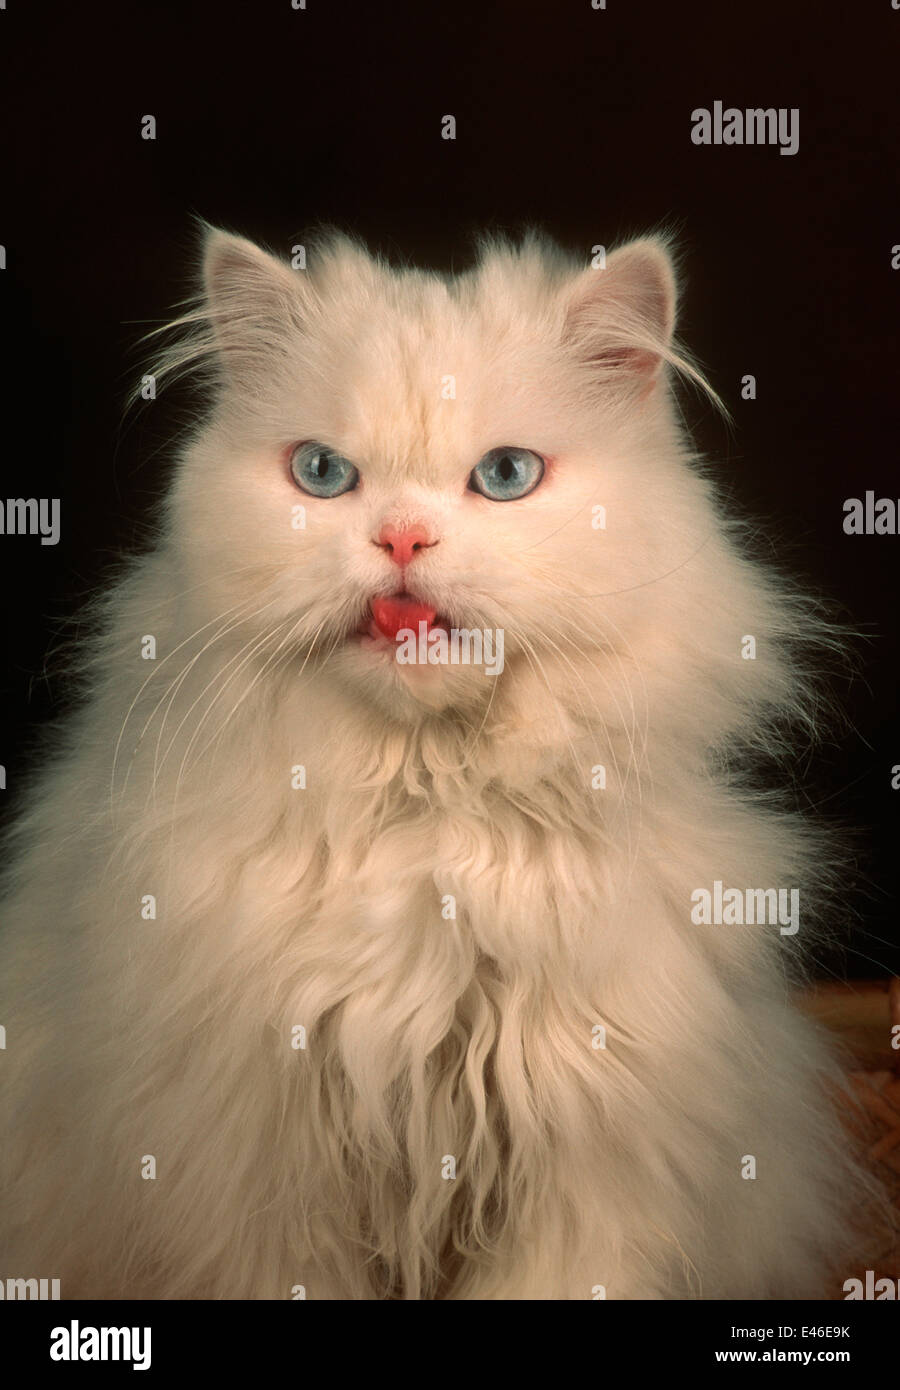 White cat with its tongue stuck out Stock Photo